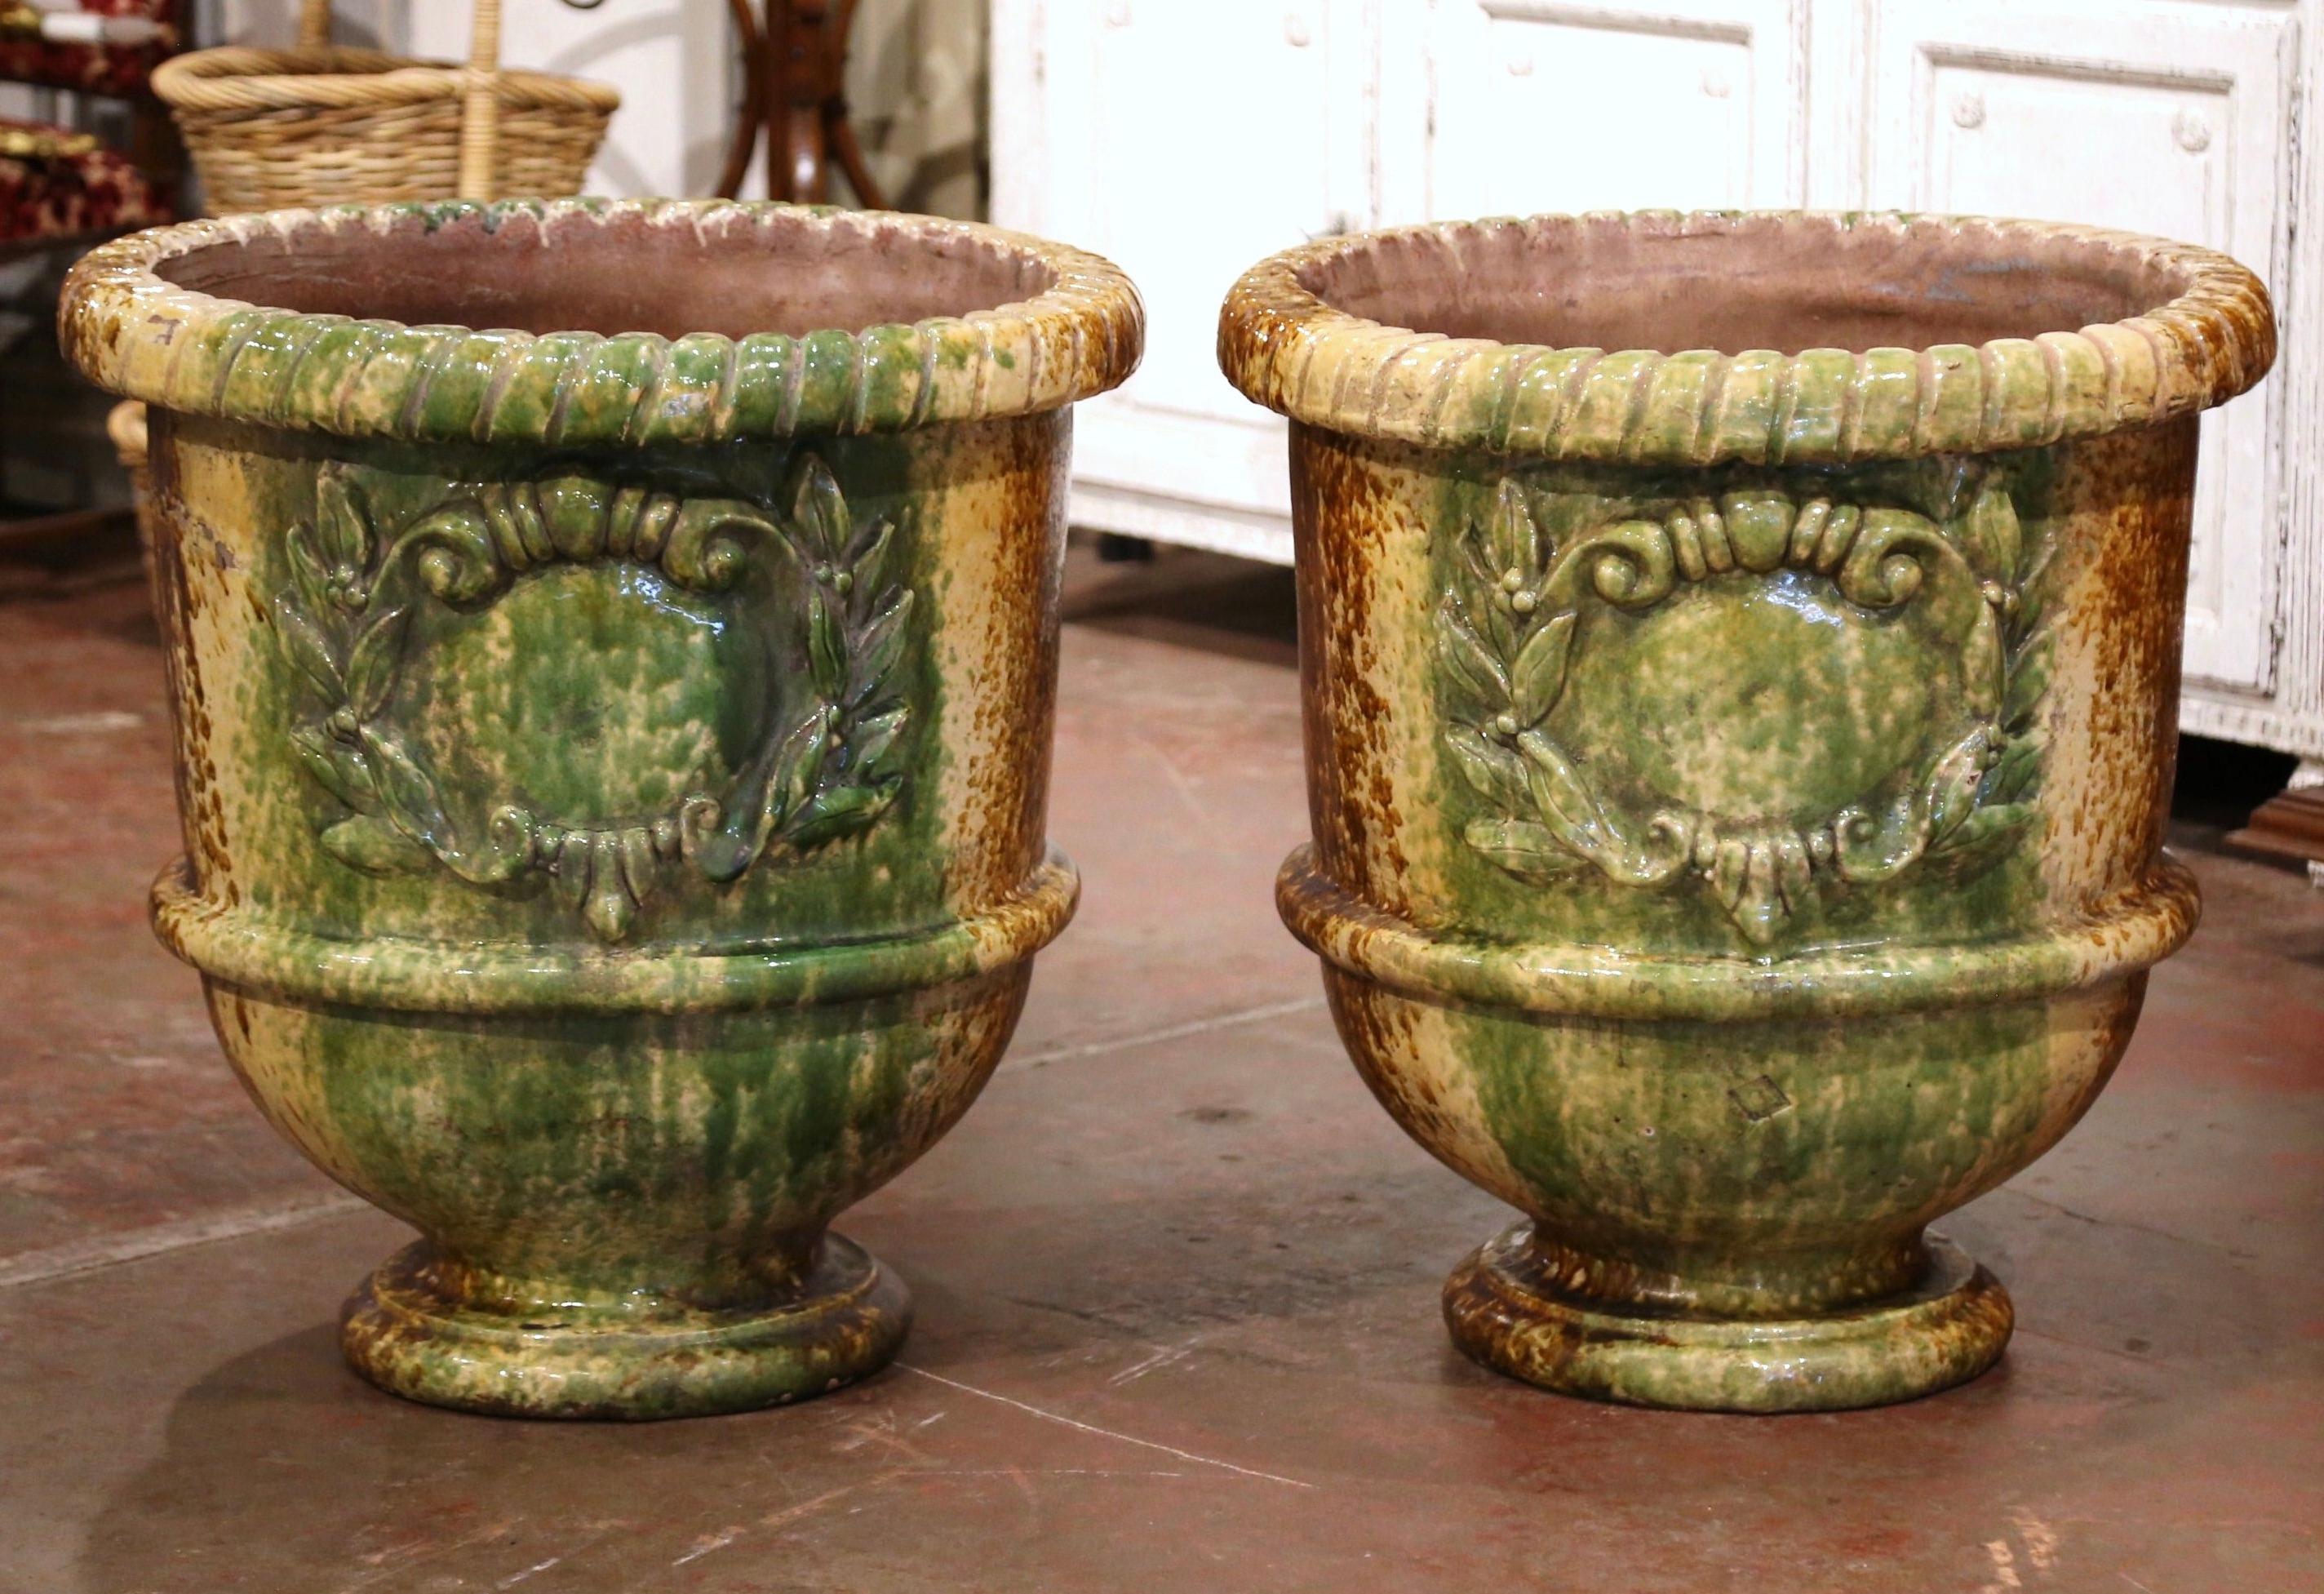 Hand-Crafted Pair of 20th Century French Glazed Terracotta Green Planters from Provence